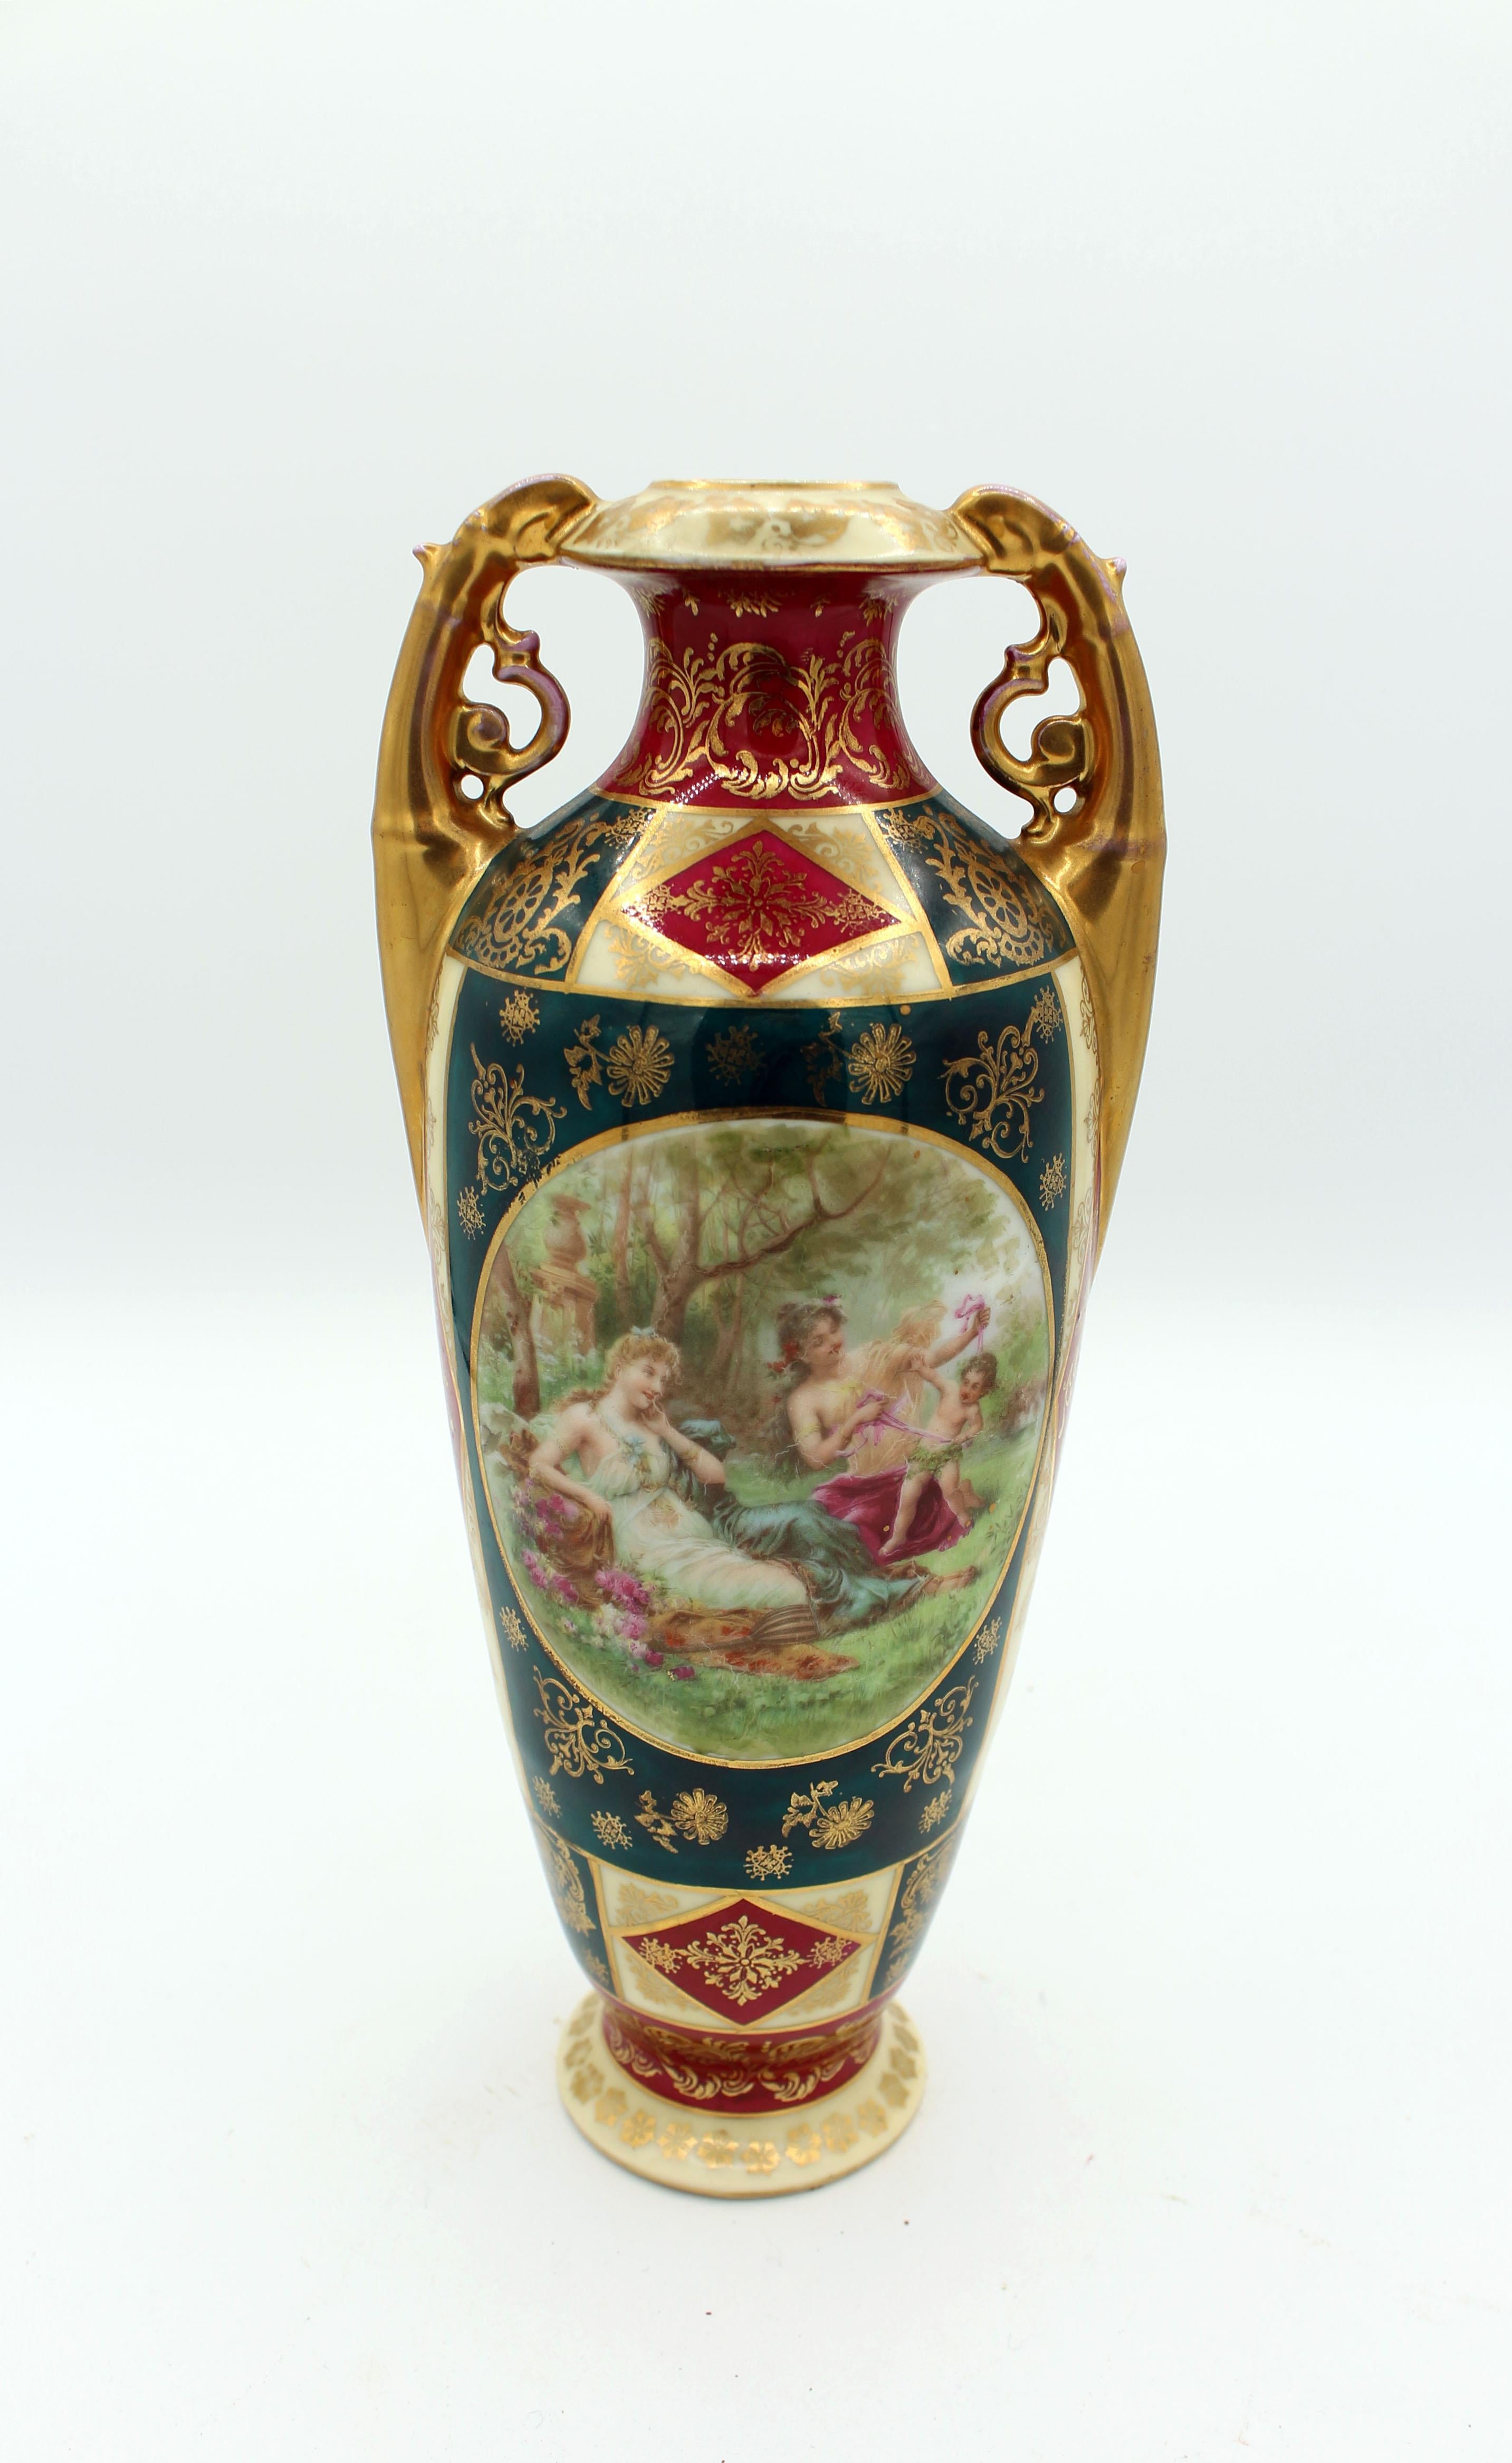 A pair of Art Nouveau vases, faux-Royal Vienna. decorated with romantic transfer print reserves. Made in Austria, c.1895-1910. 10 1/2